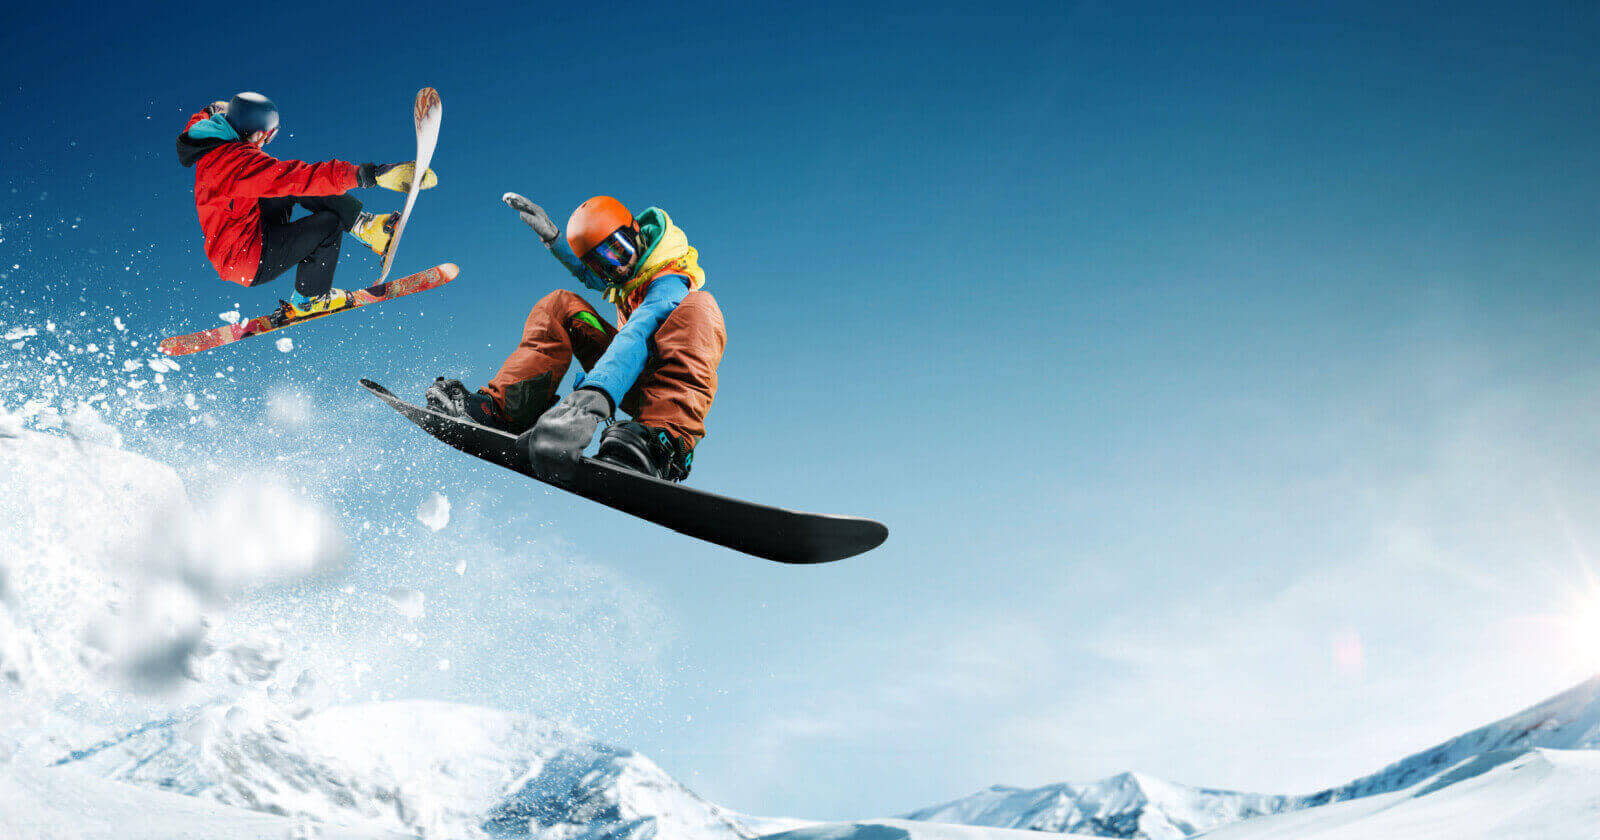 Hit the Slopes in Style: Your Guide to Snowboarding and Skiing Adventures